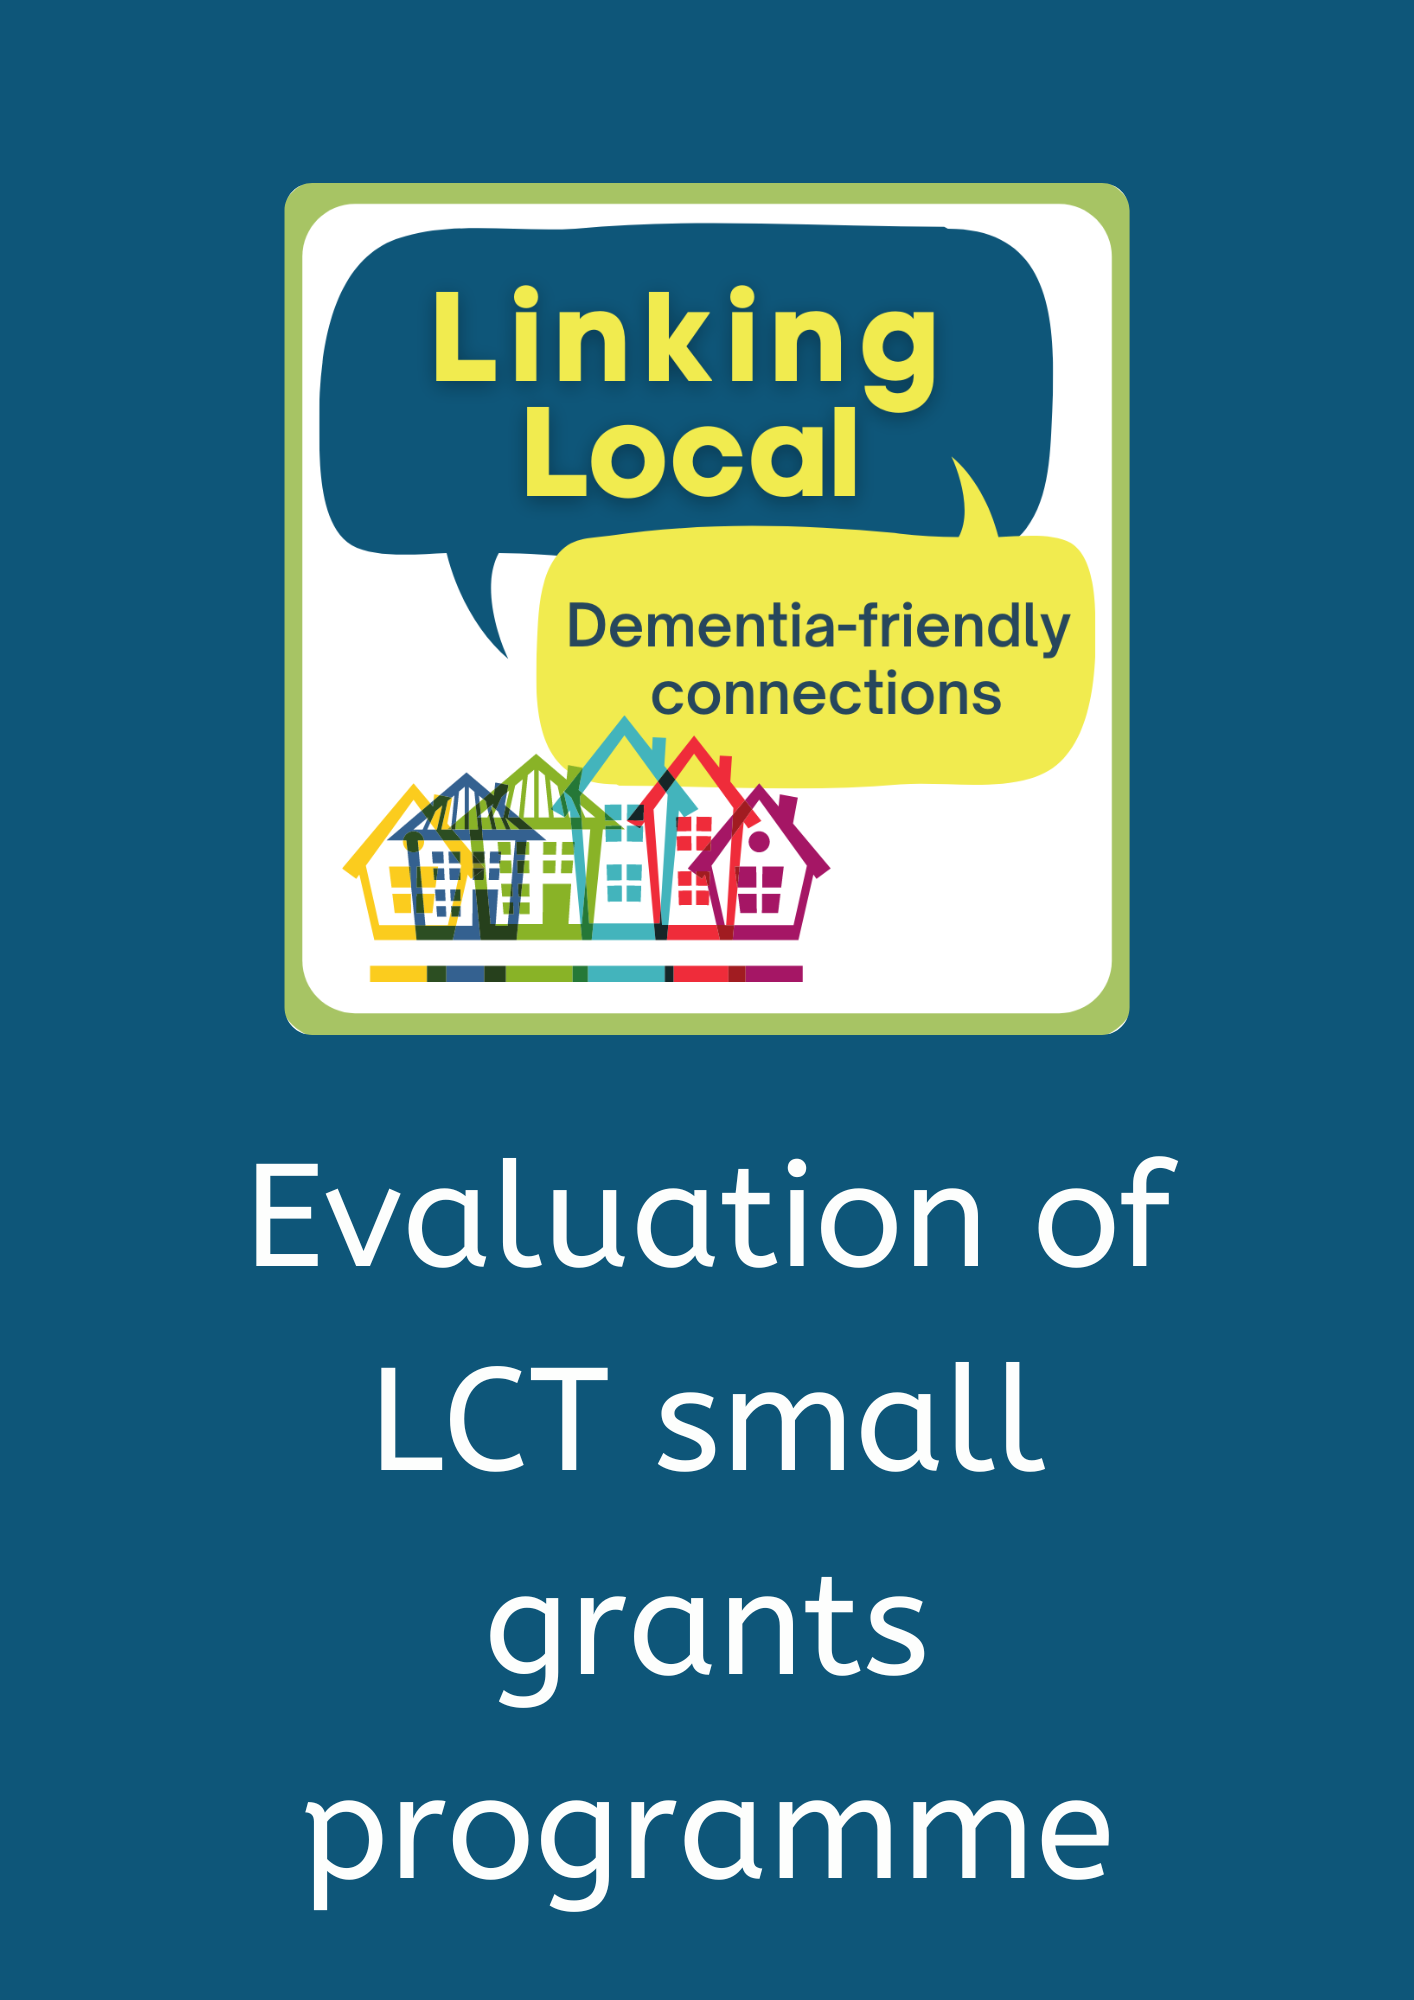 Evaluation of LCT small grants programme